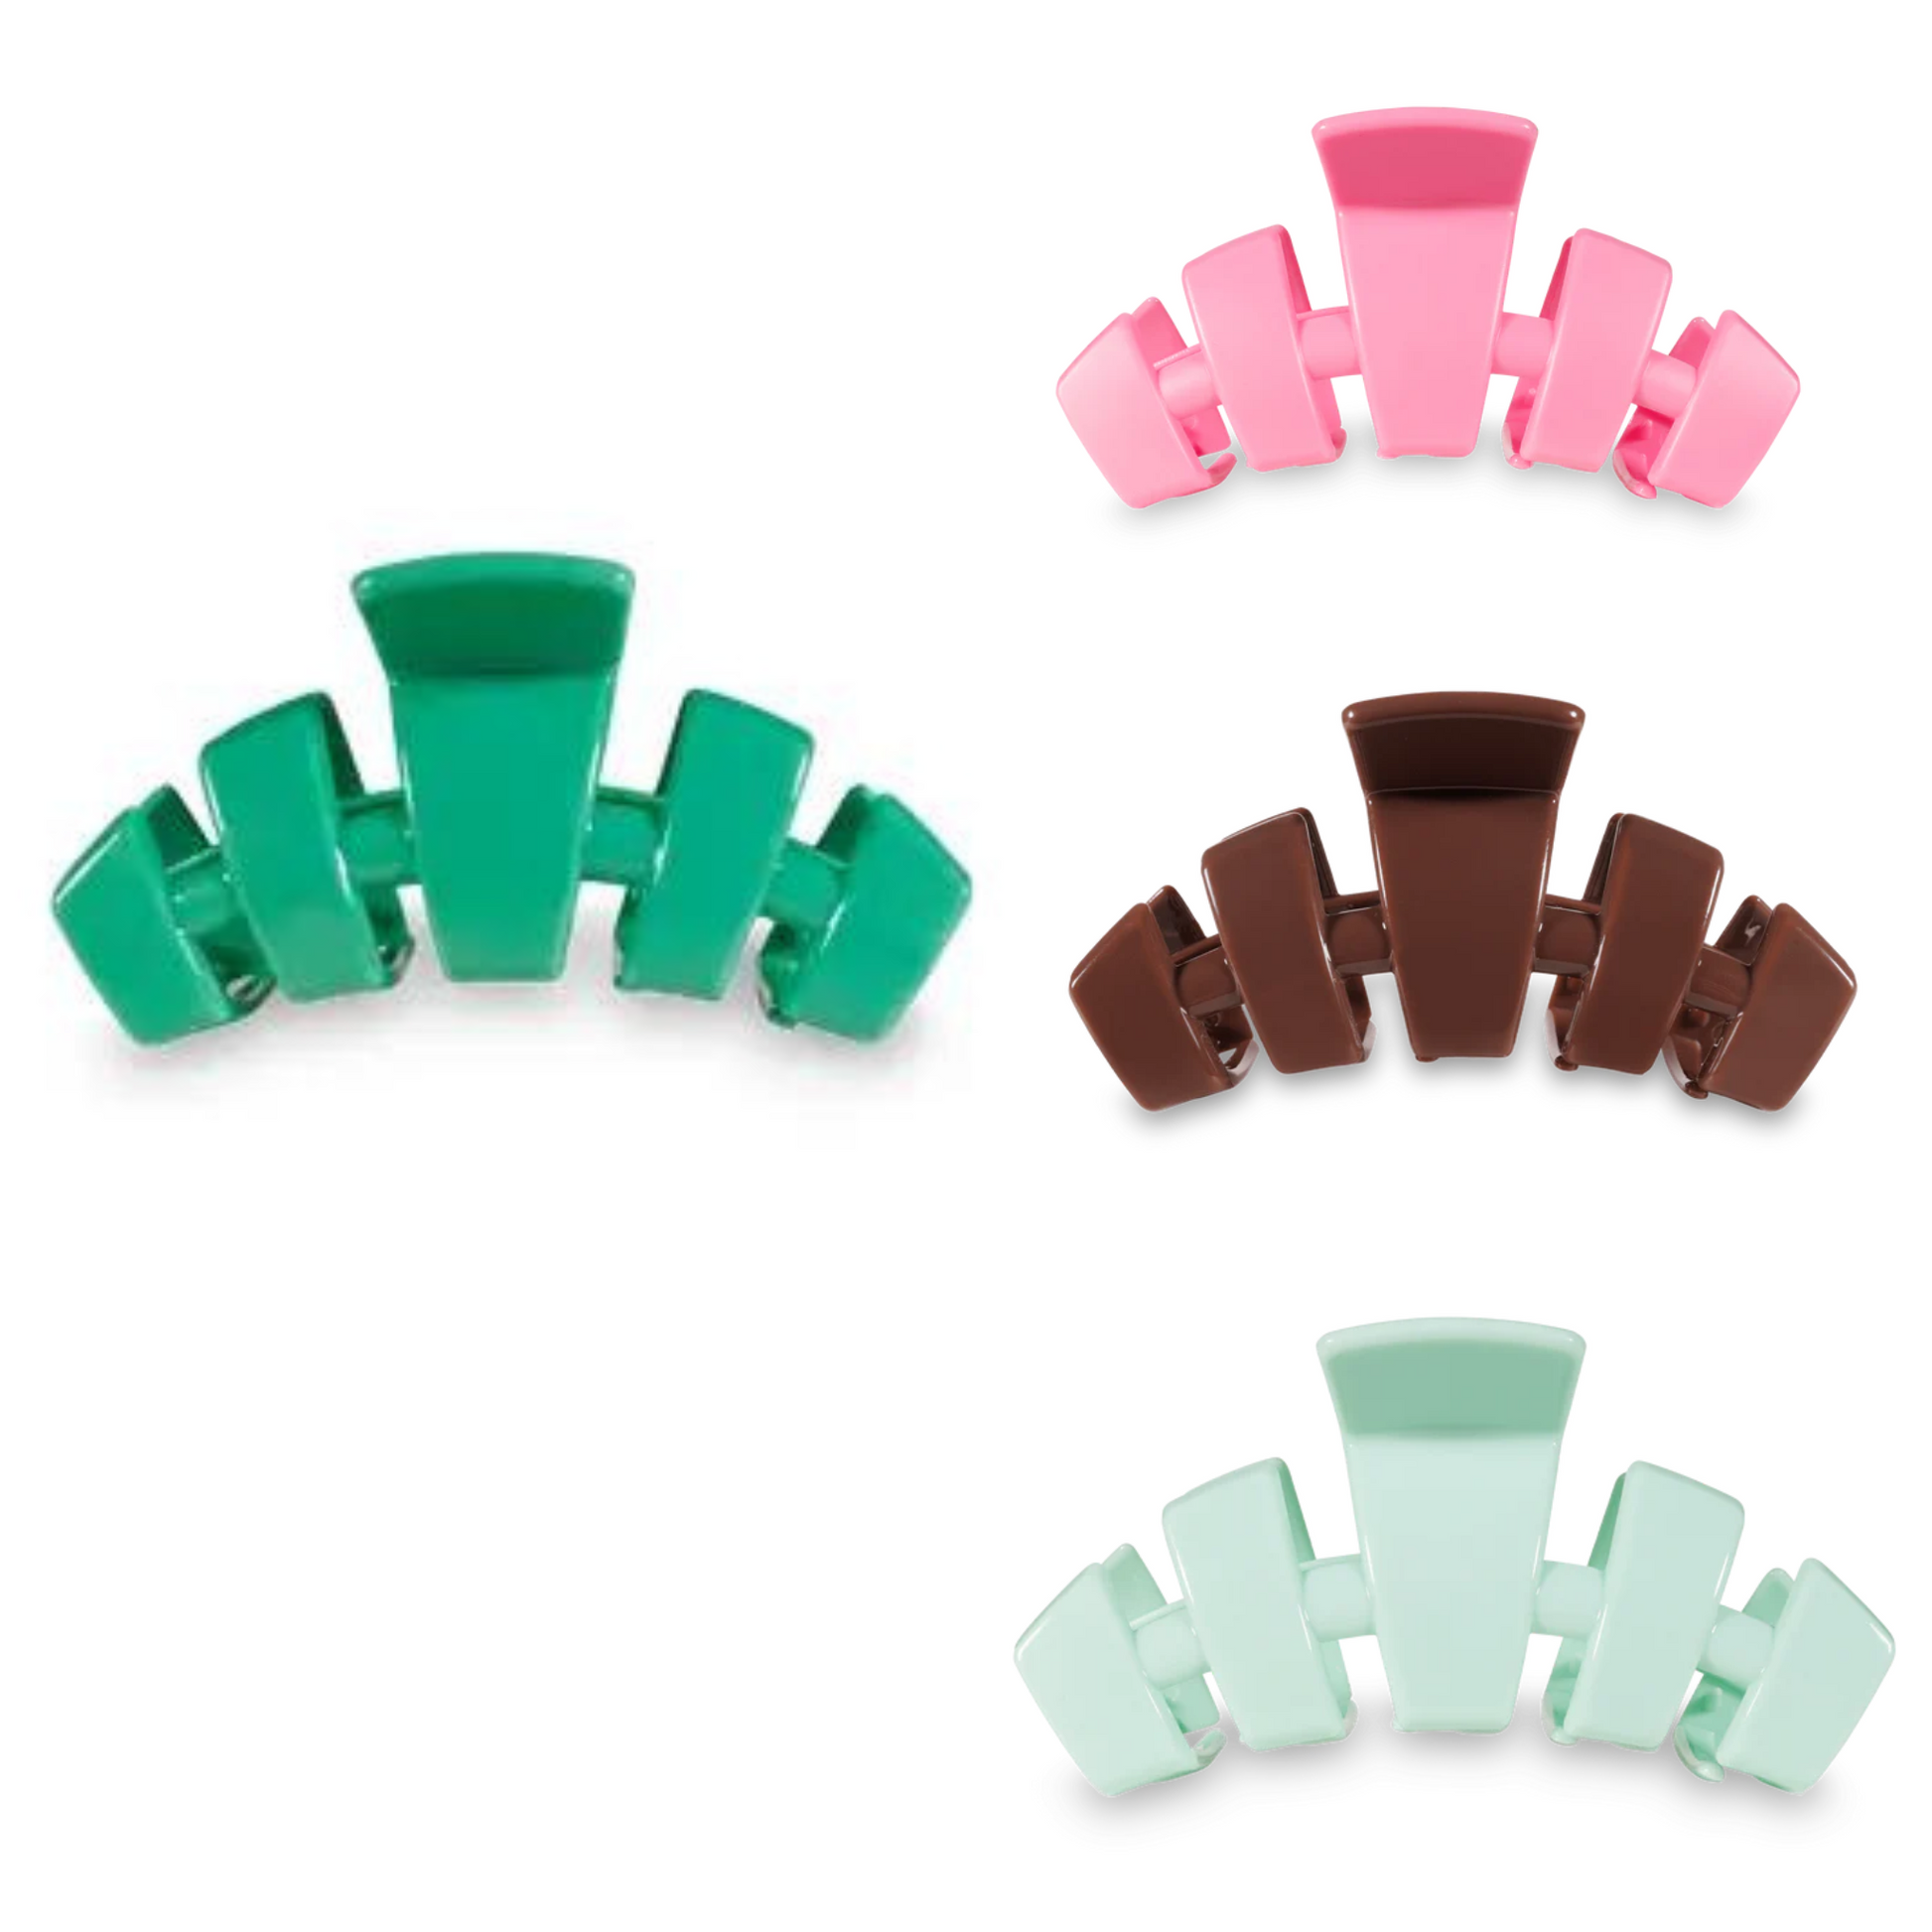 Say goodbye to breakable clips! We have perfected the hair tie and now have re-invented the clip. Each hair clip has bendable teeth that take back to shape, they work on all hair types and have a strong hold. Hold your hair and enhance your style with the new TELETIES Clip! 